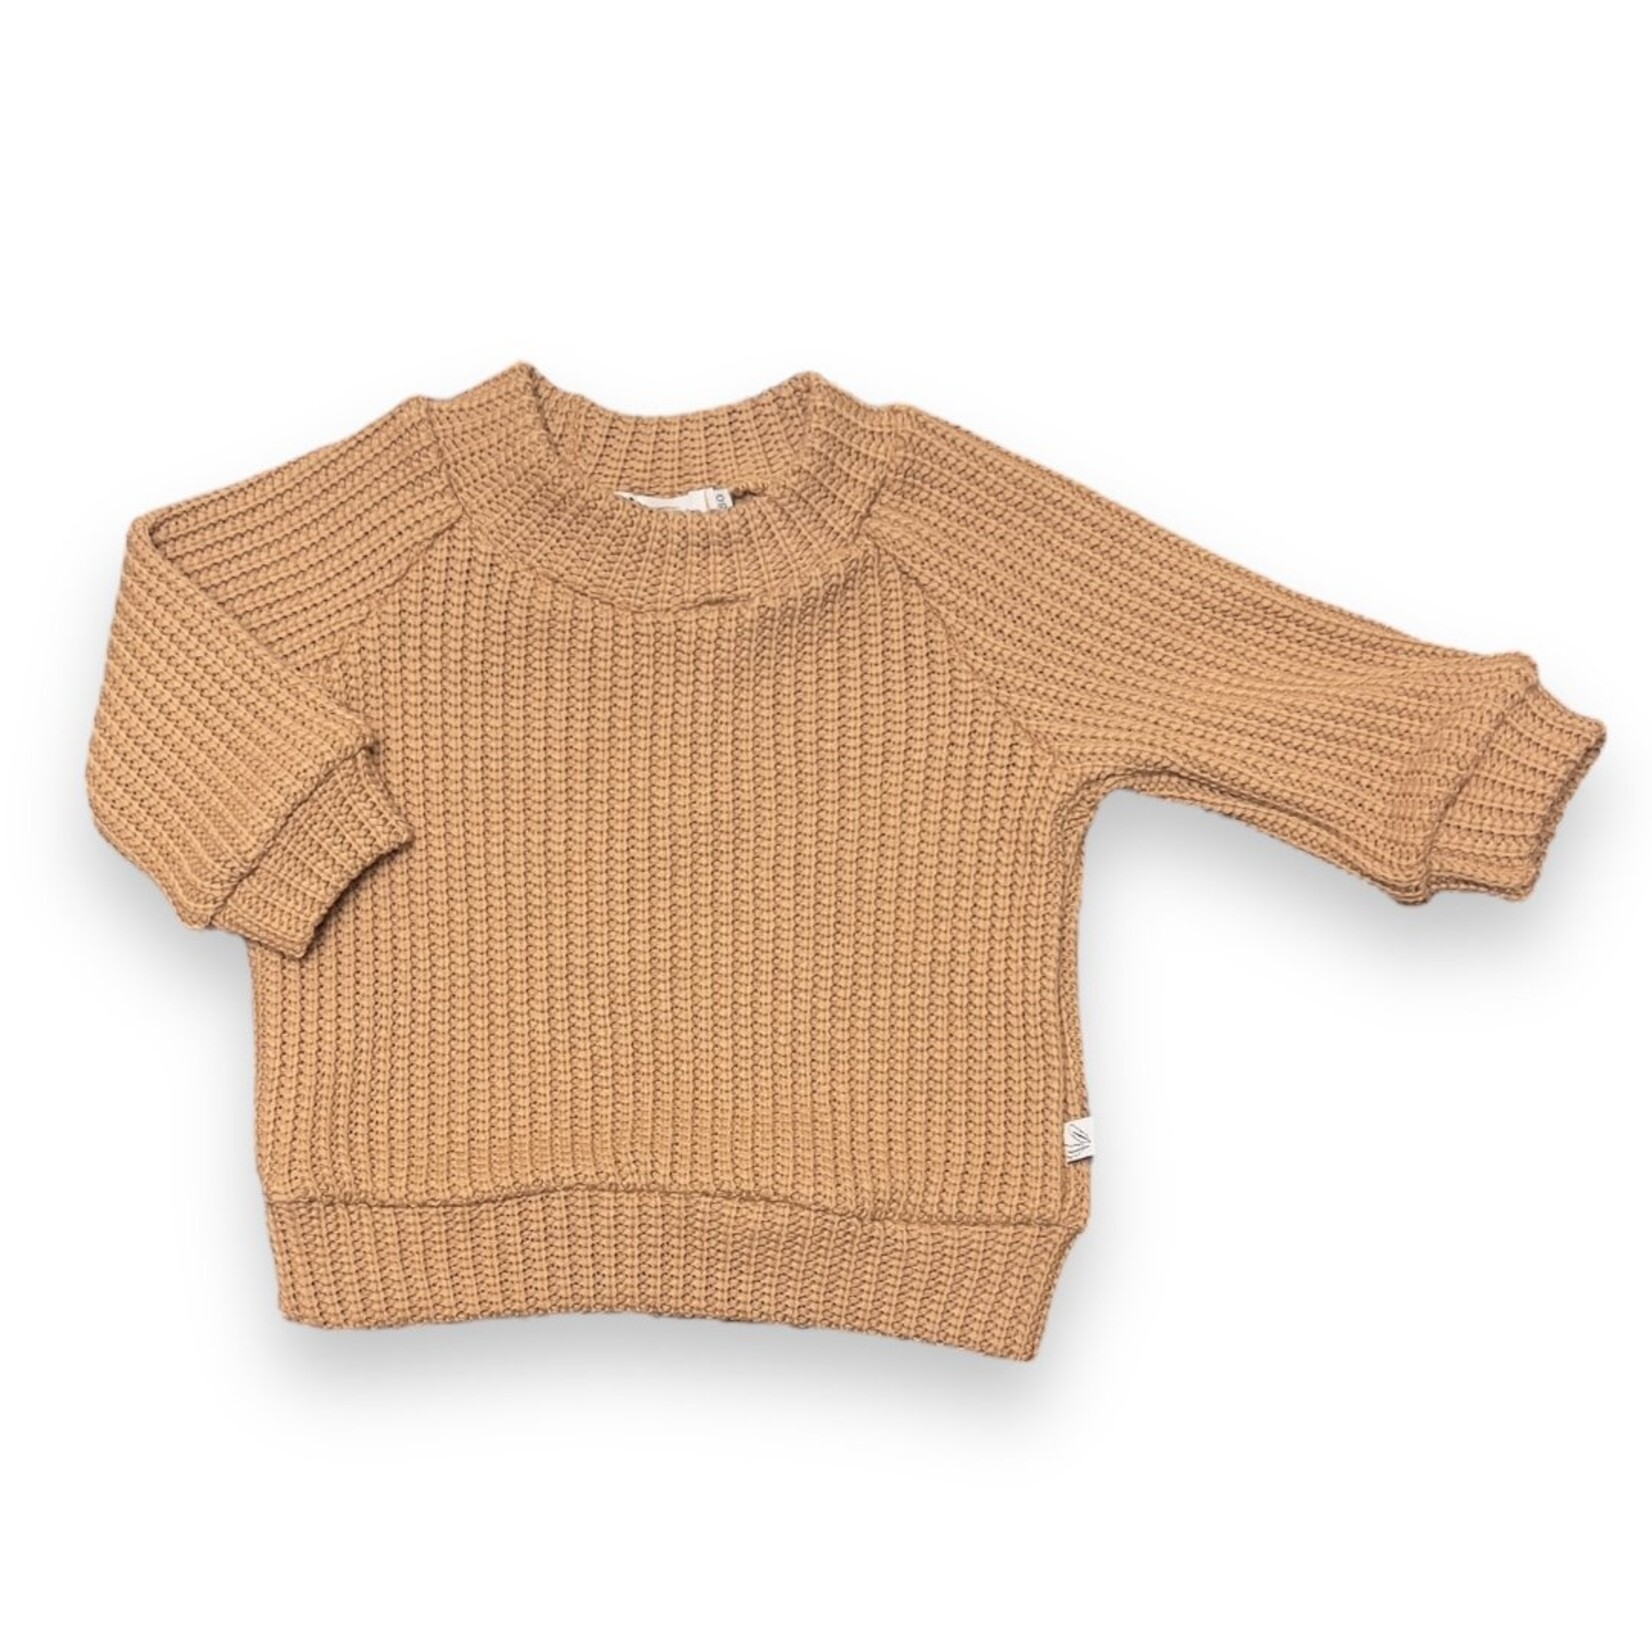 Feathers® Sweater big knit - Cacao